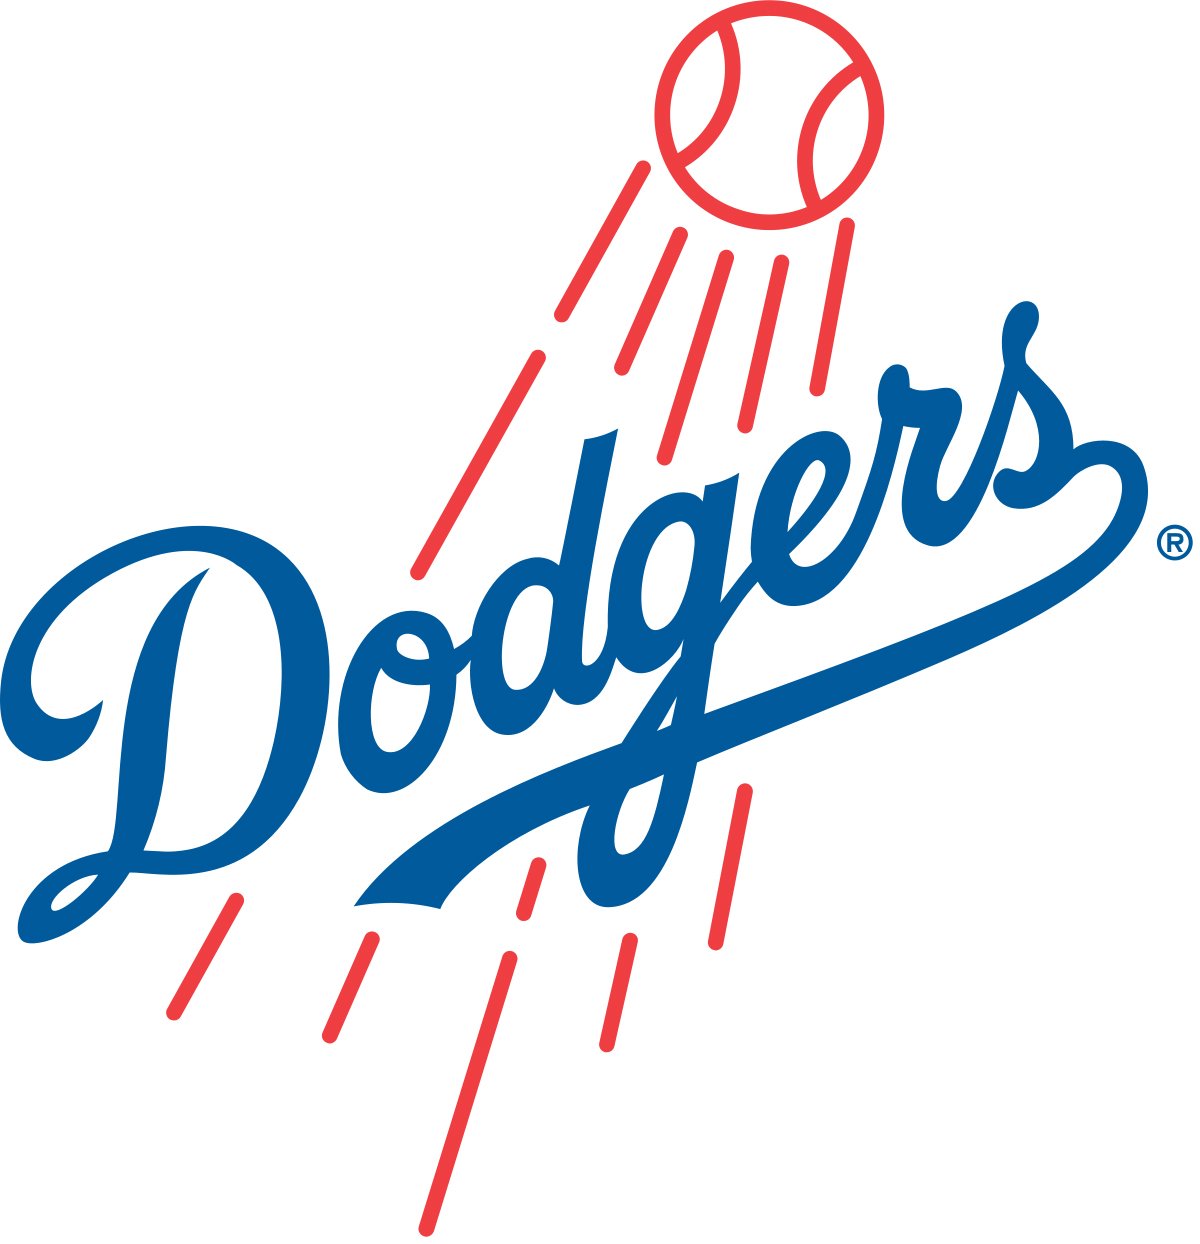 Los Angeles Dodgers Colors - Hex and RGB Color Codes